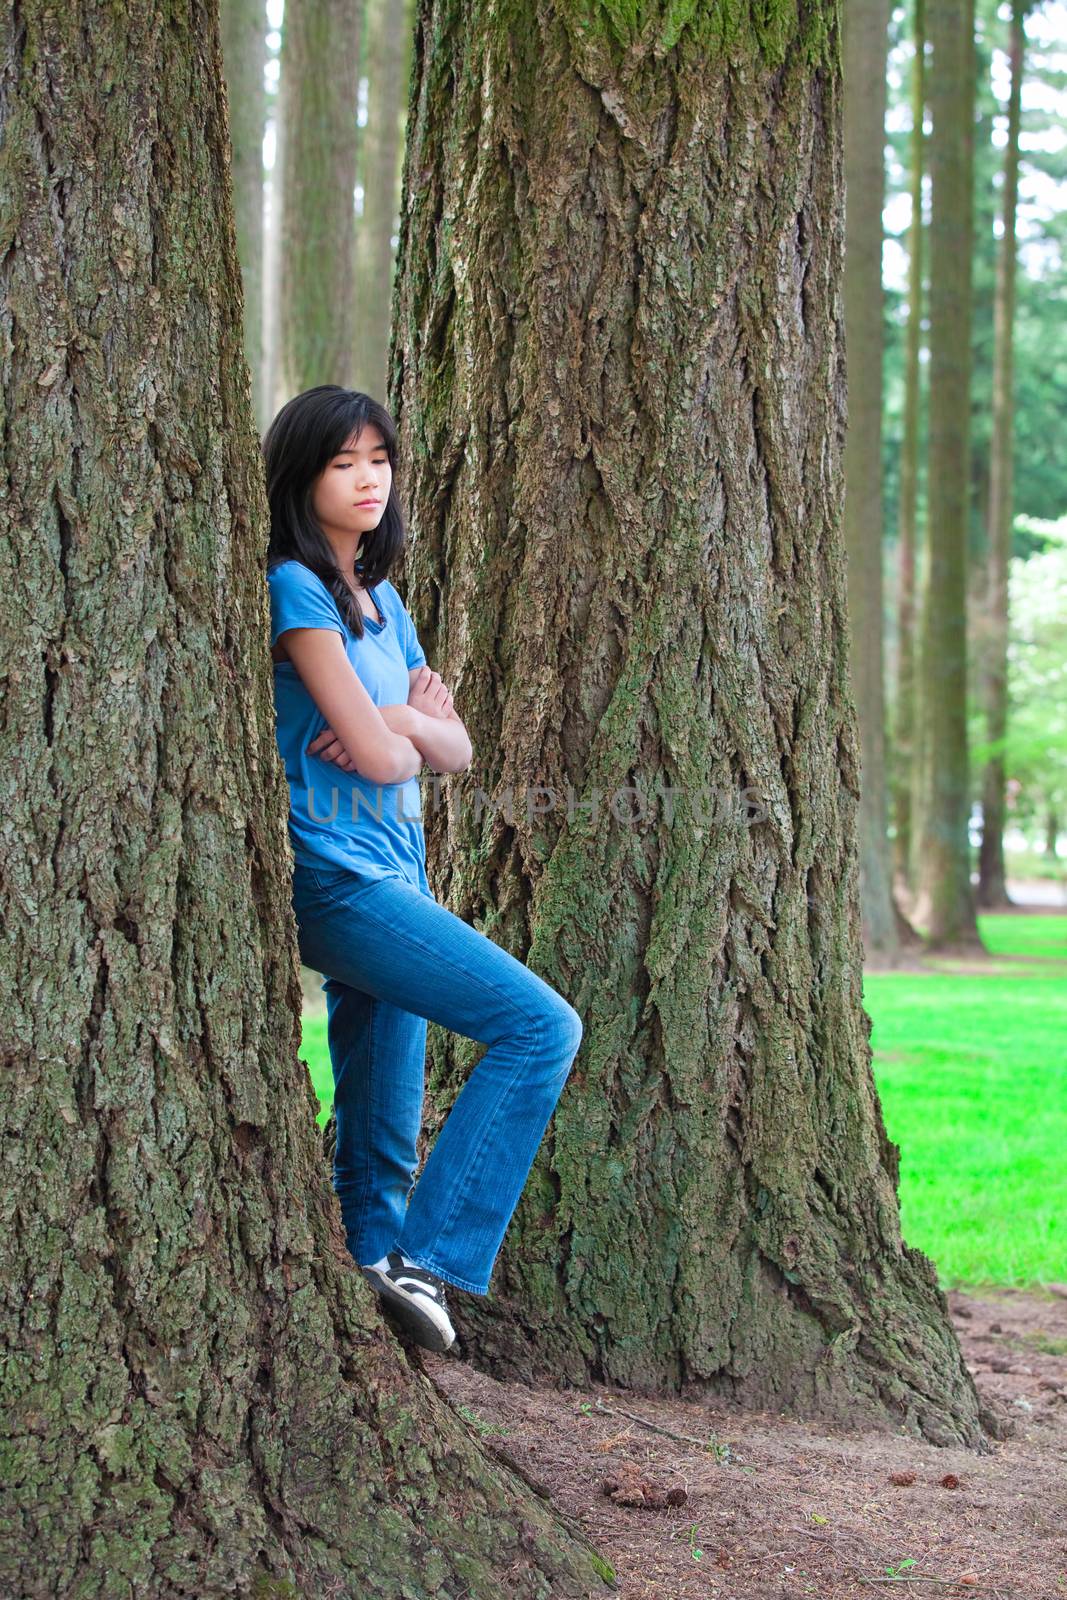 Young teen girl leaning against large pine tree trunk, sad by jarenwicklund